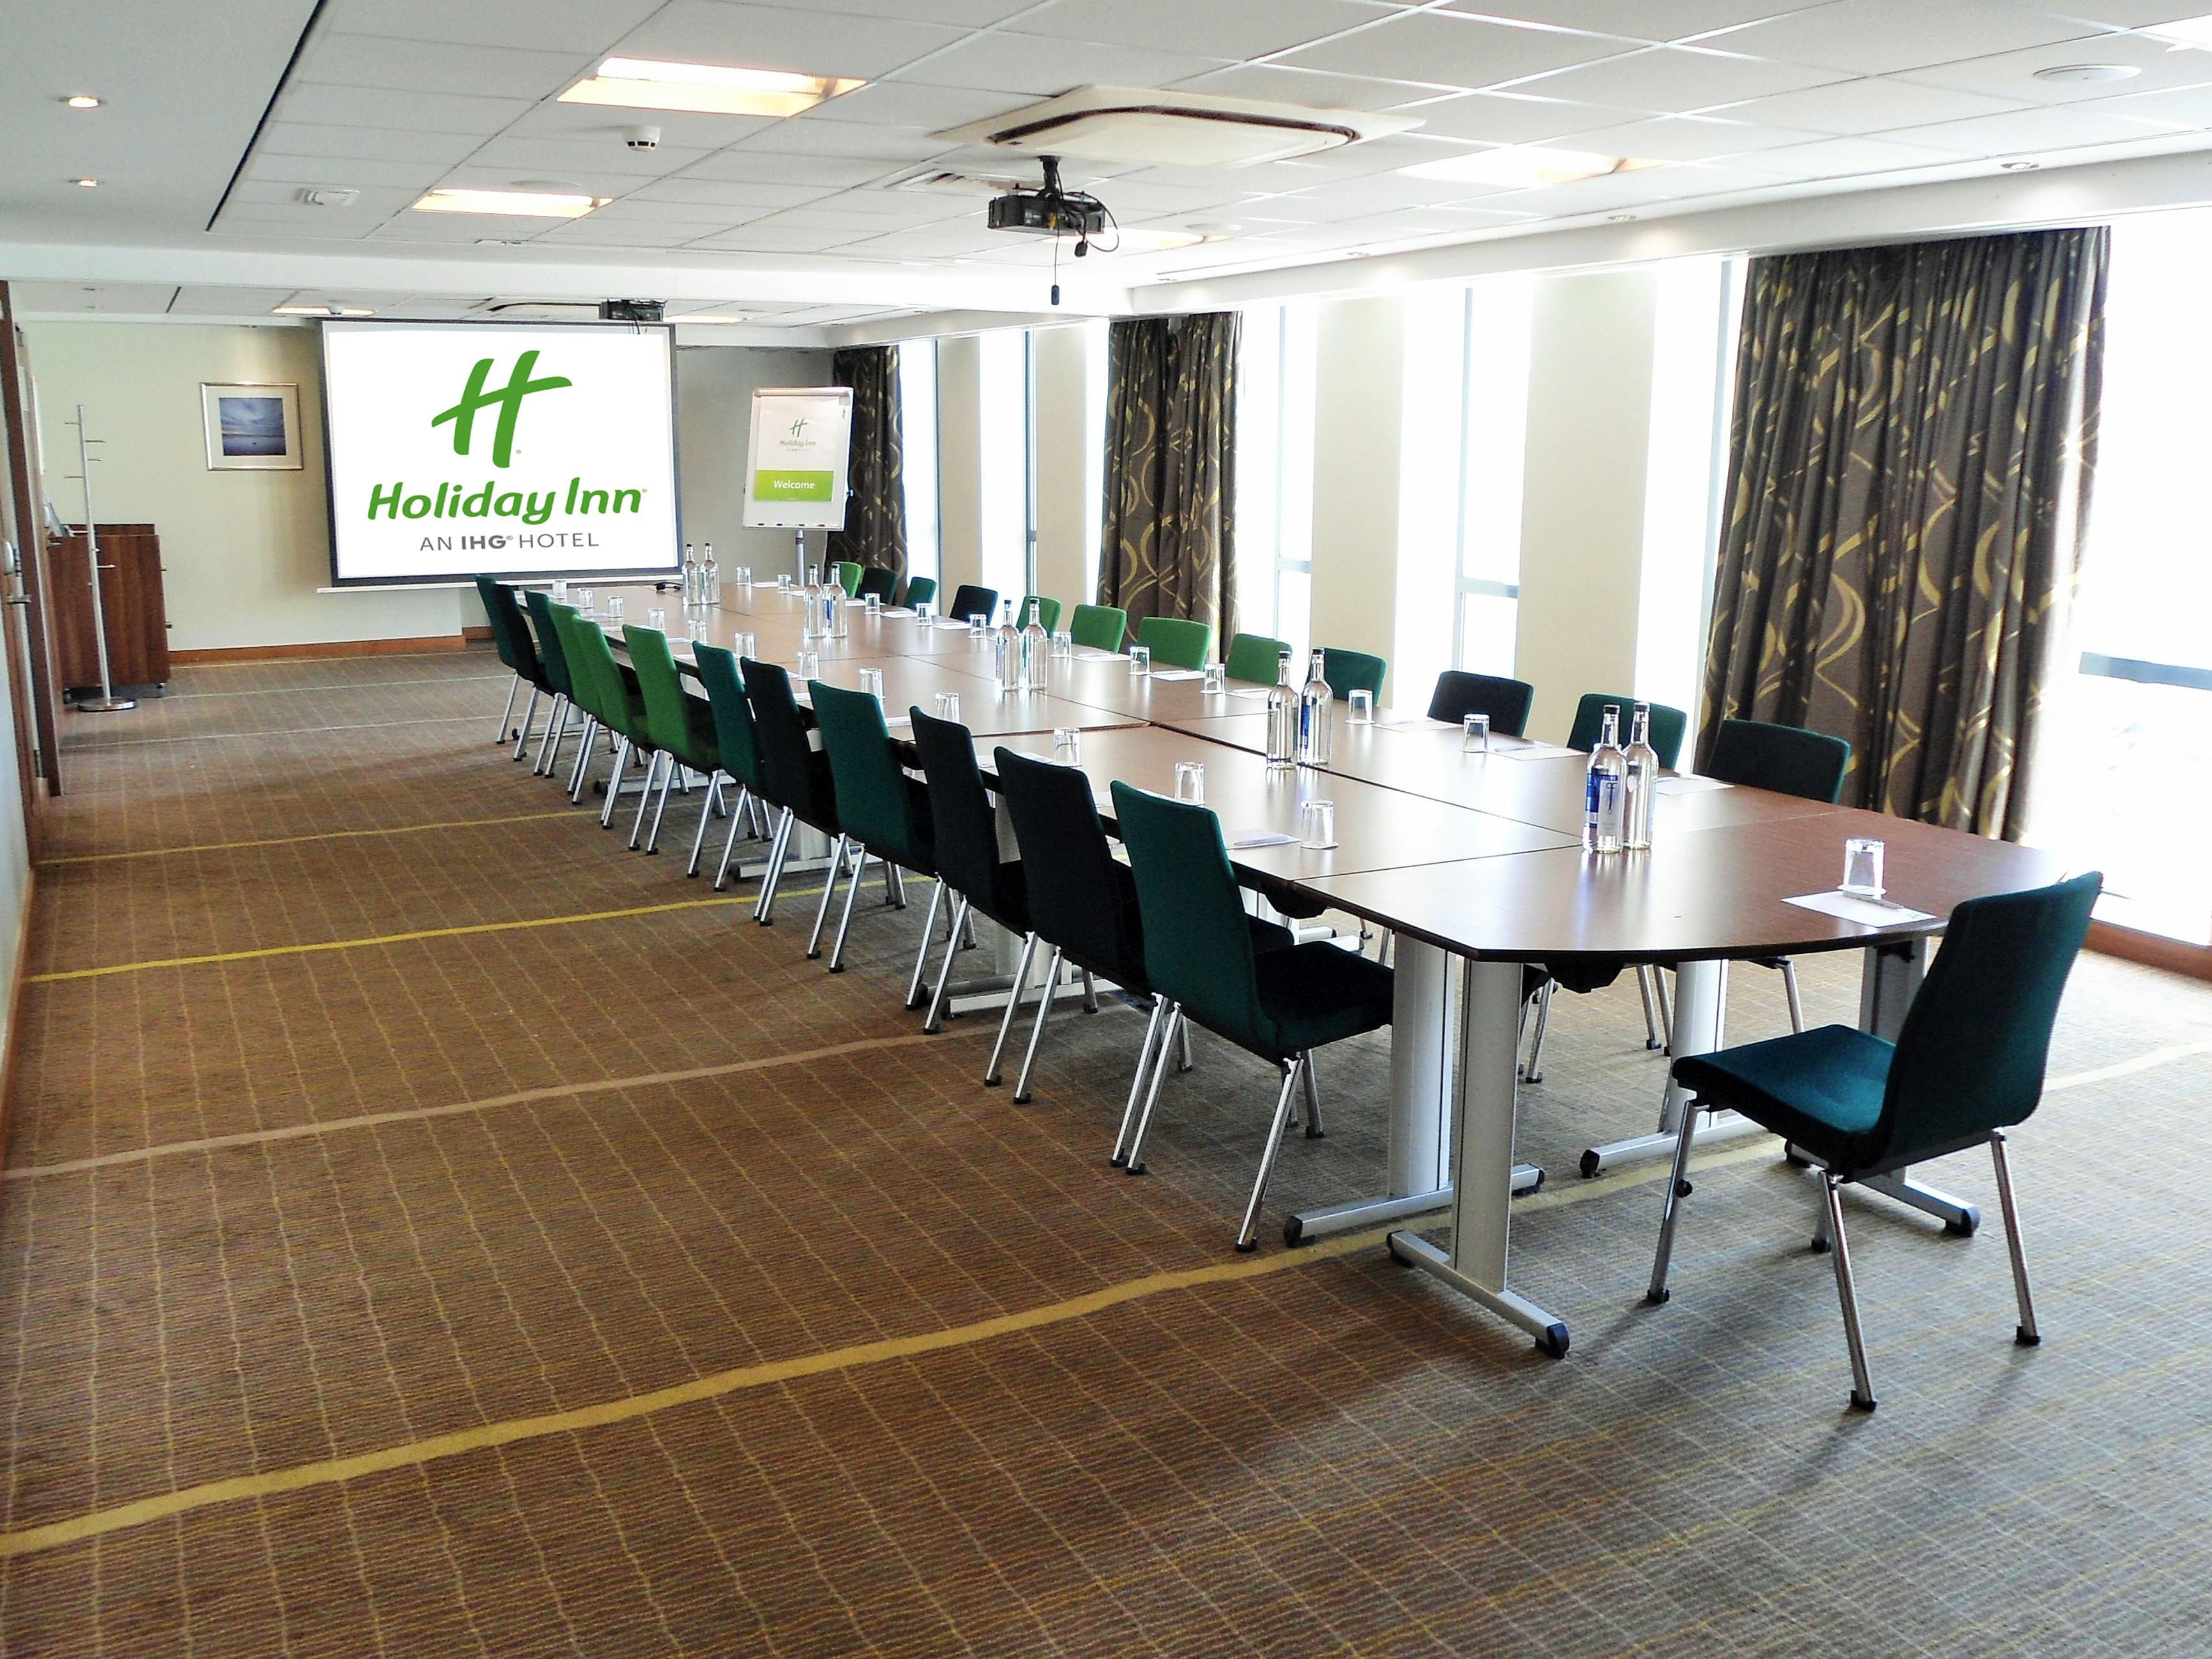 Holiday Inn Bristol City Centre offers 7 flexible naturally lit meeting and event rooms. All are fully accessible and come fully equipped with built-in AV.